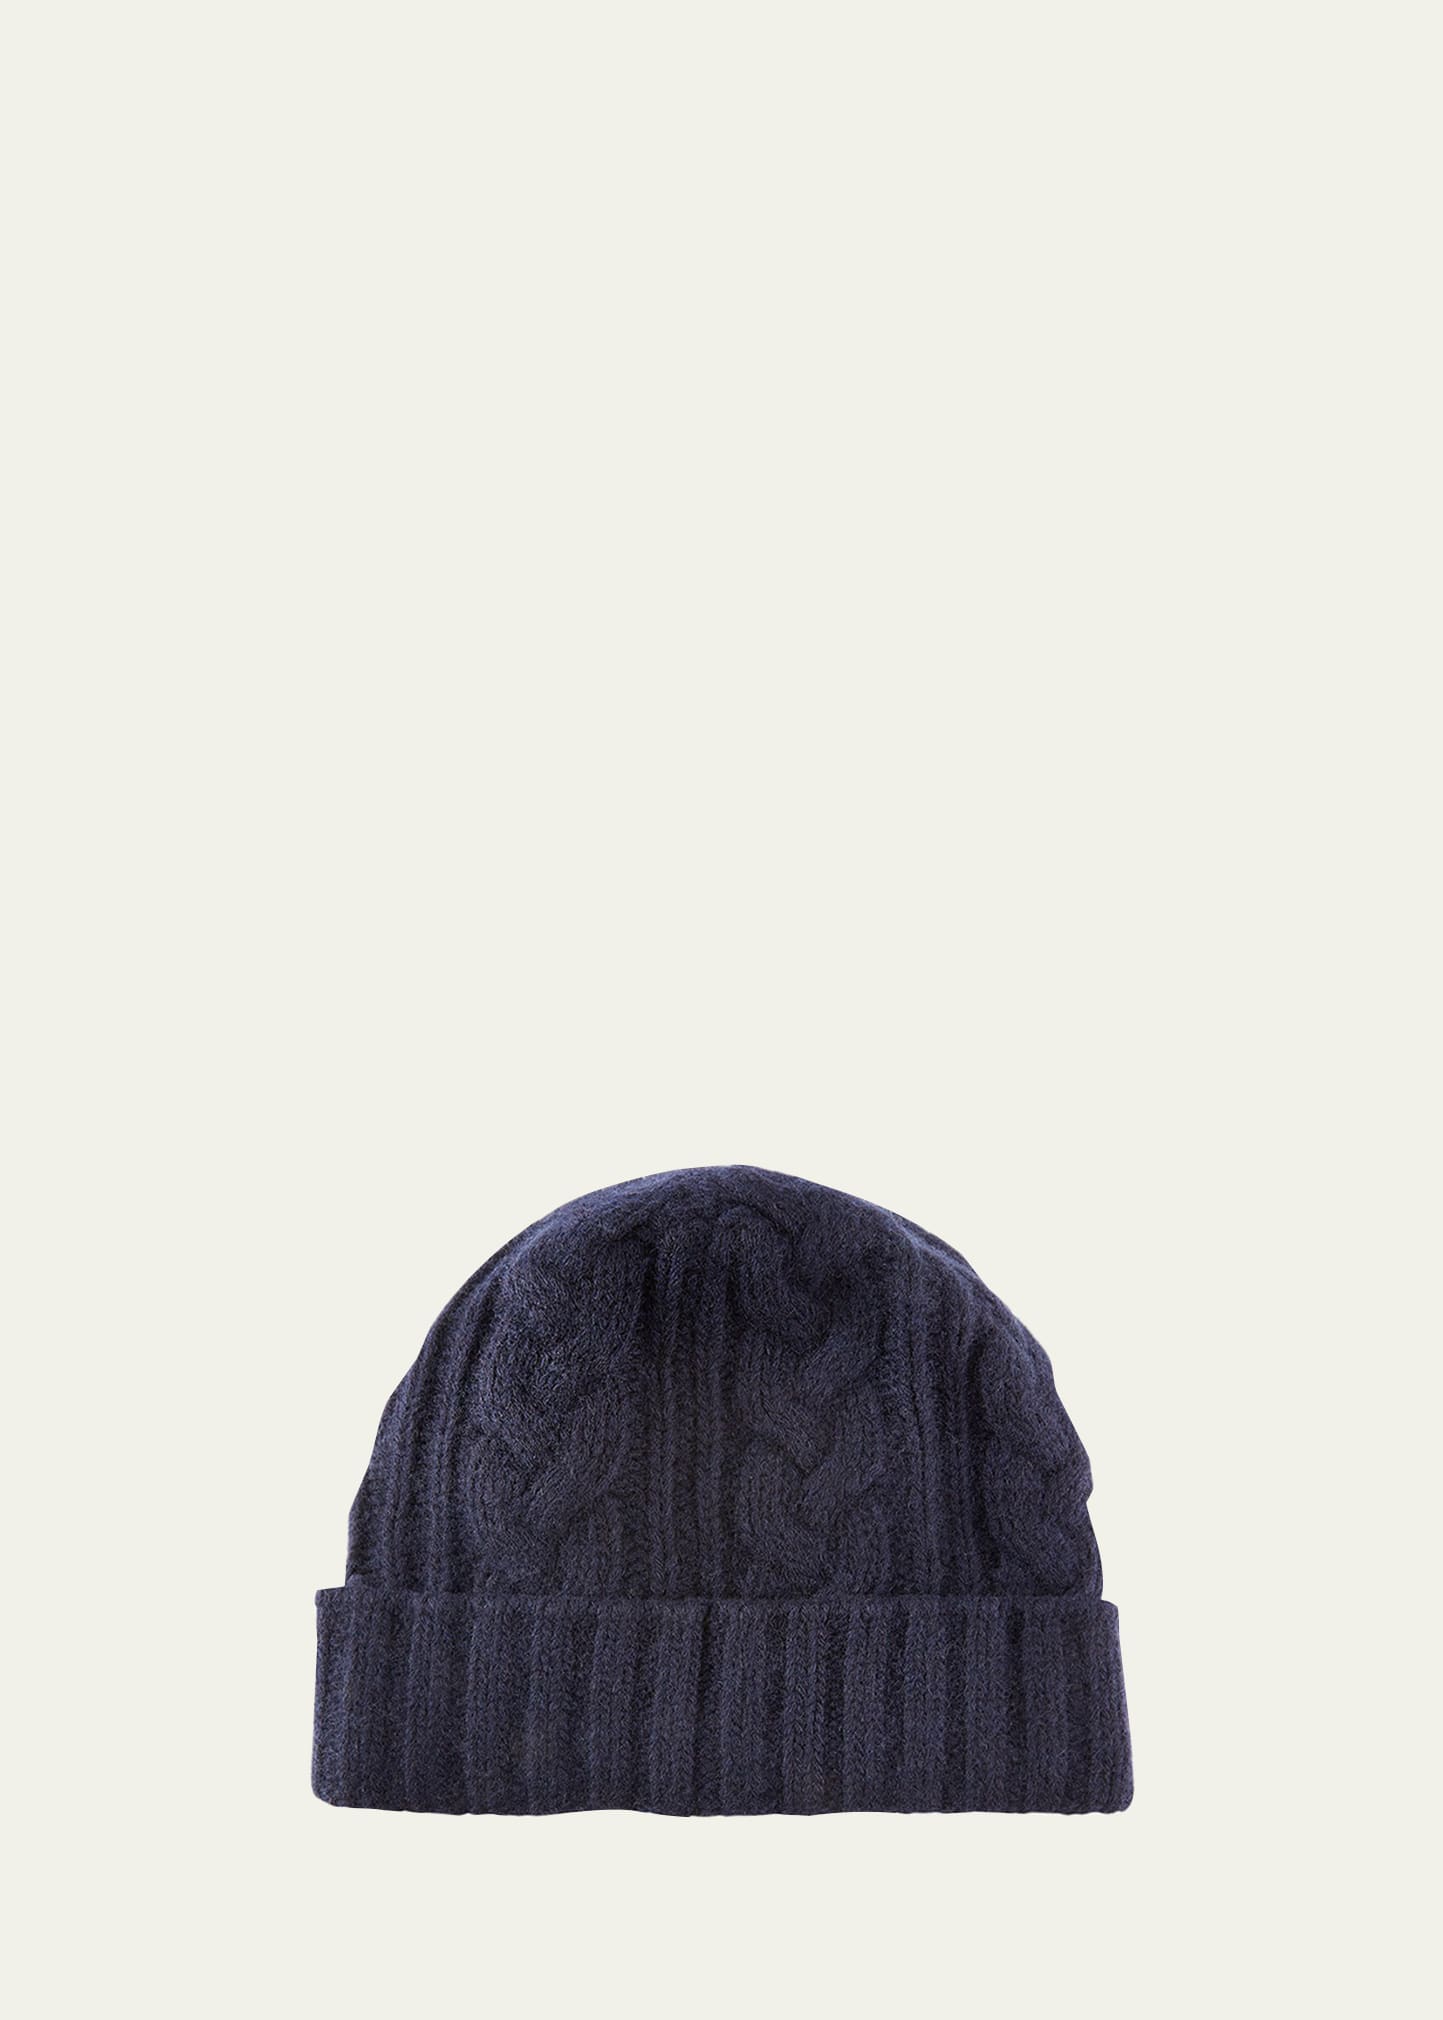 Men's Cable-Knit Cuffed Cashmere Beanie Hat